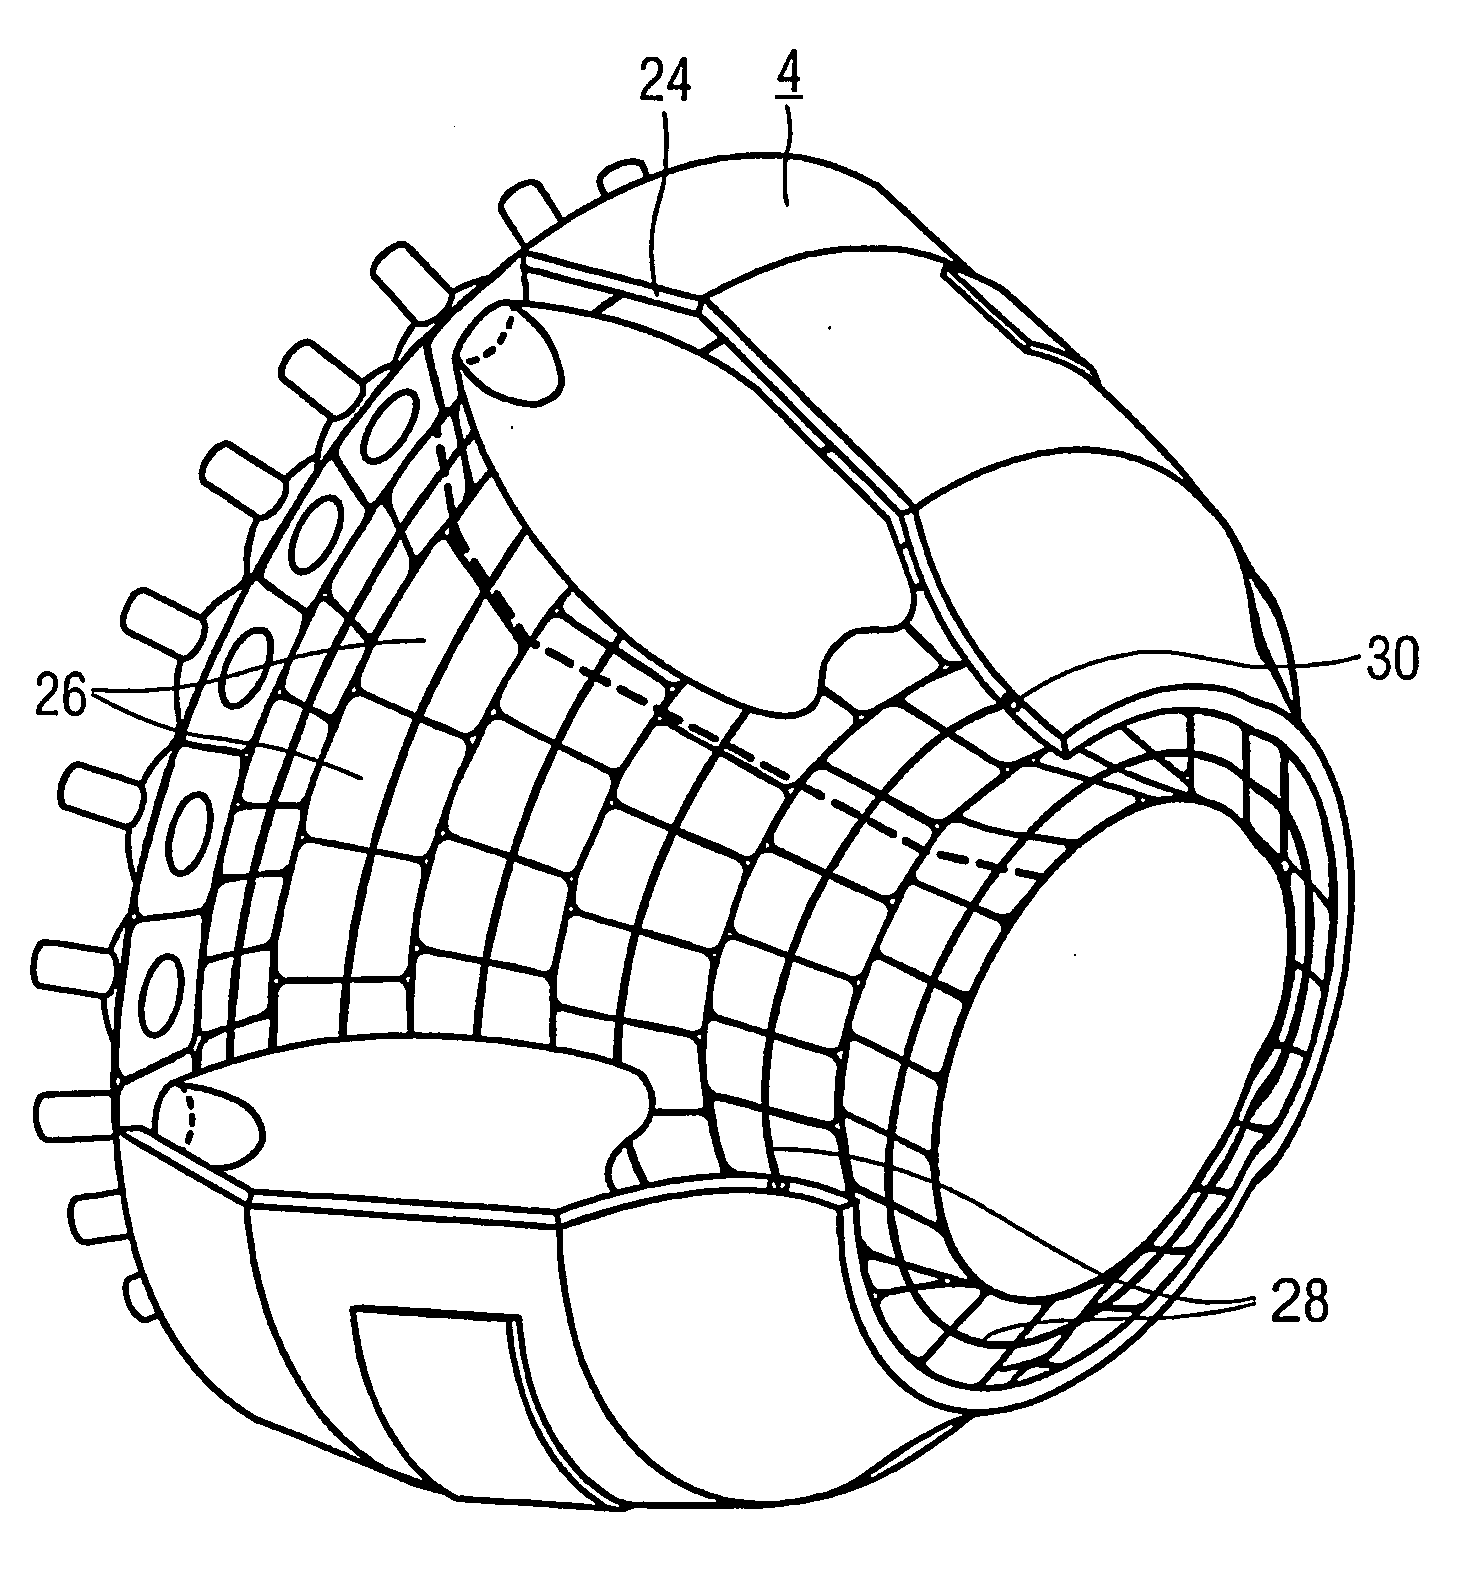 Thermal shield, especially for lining the wall of a combustion chamber